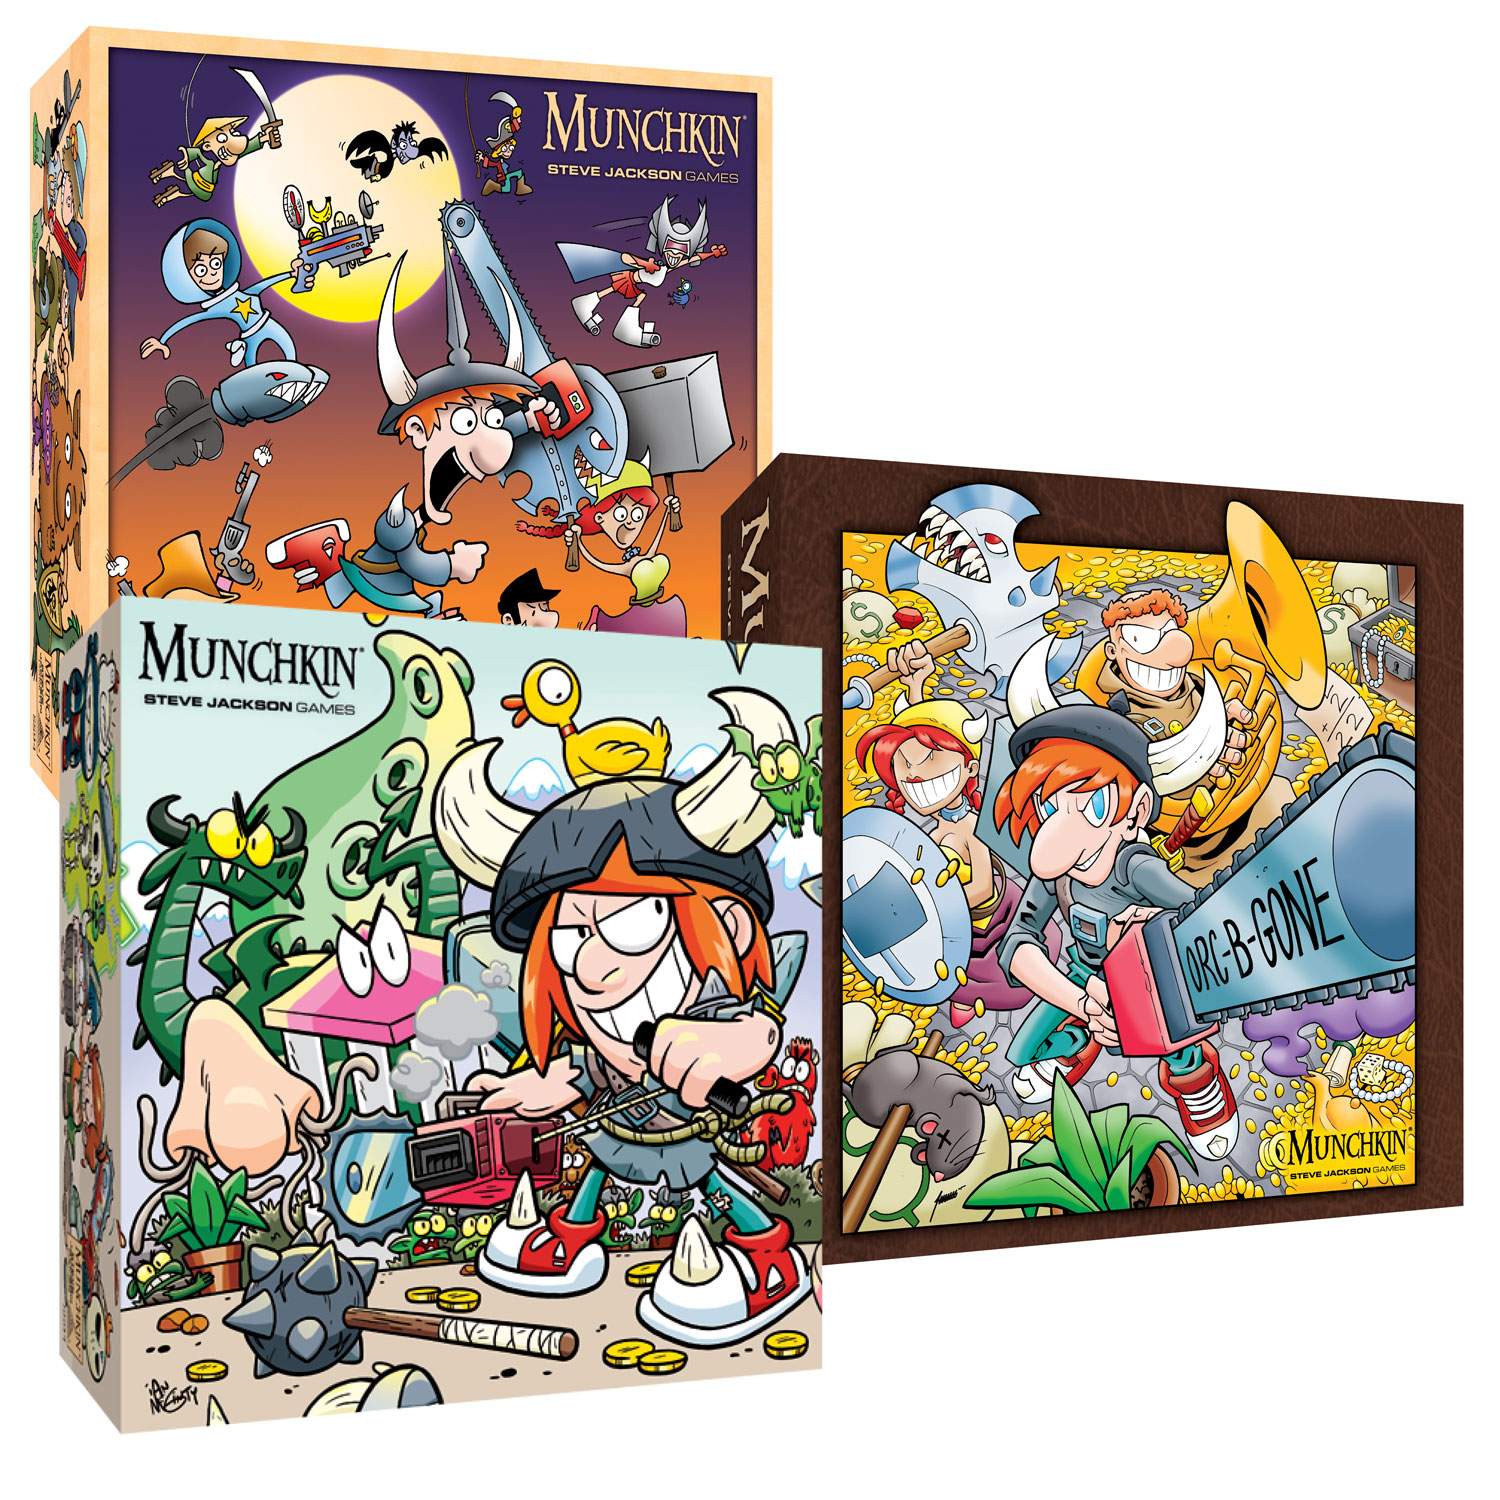 2013 *SEALED* Munchkin DRAGONS Booster Pack 1ST EDITION Steve Jackson Games 